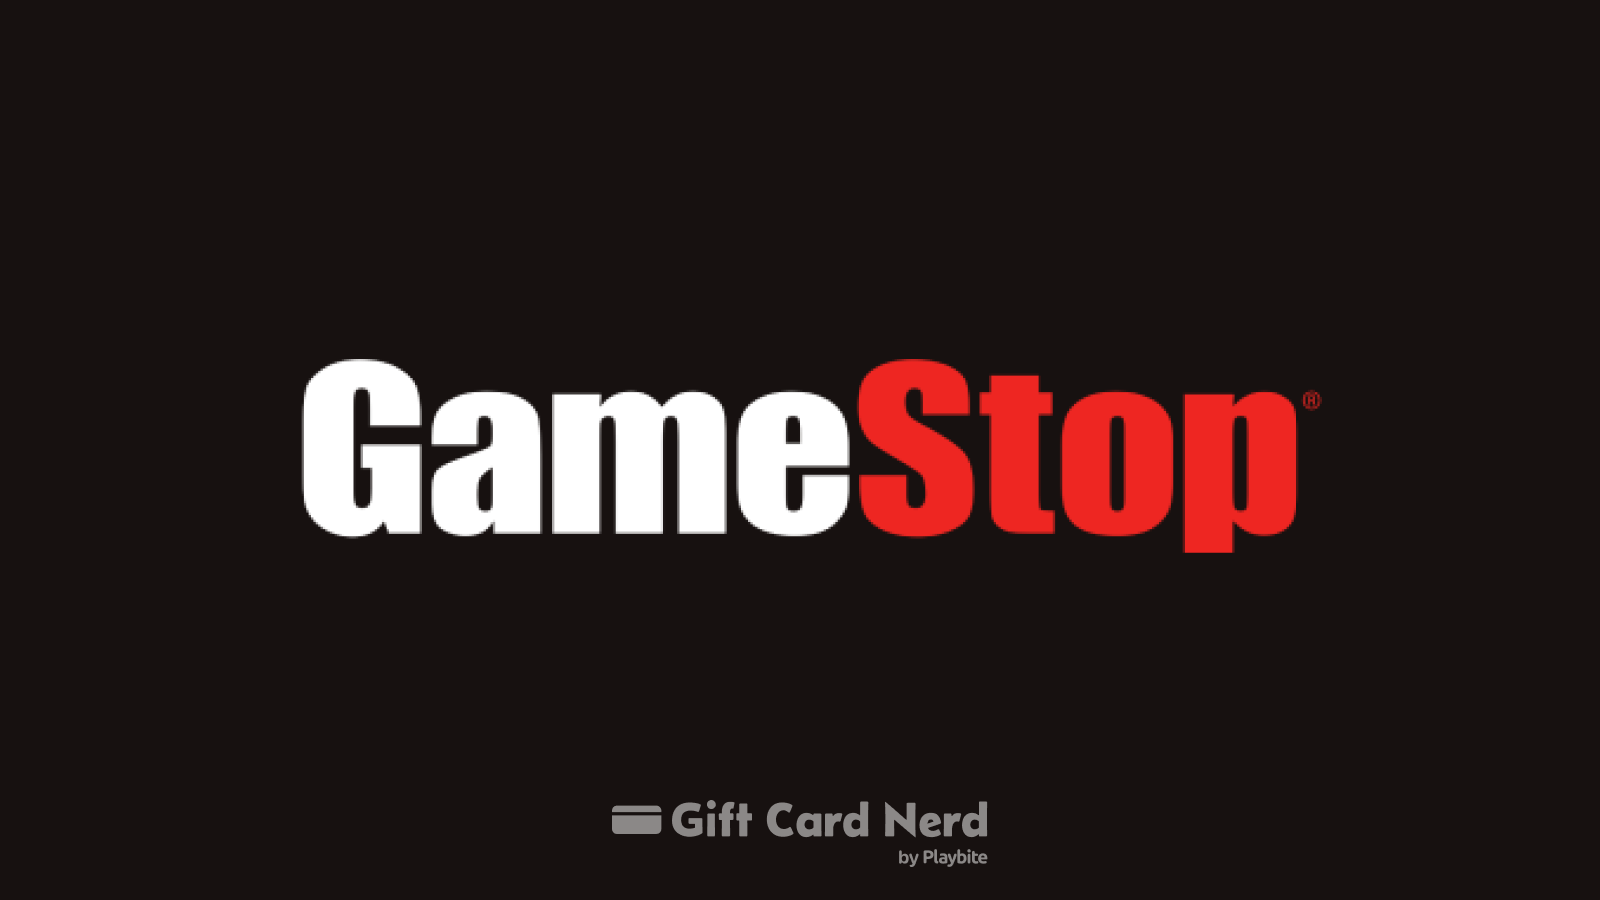 Can I use a GameStop gift card on the Google Play Store?